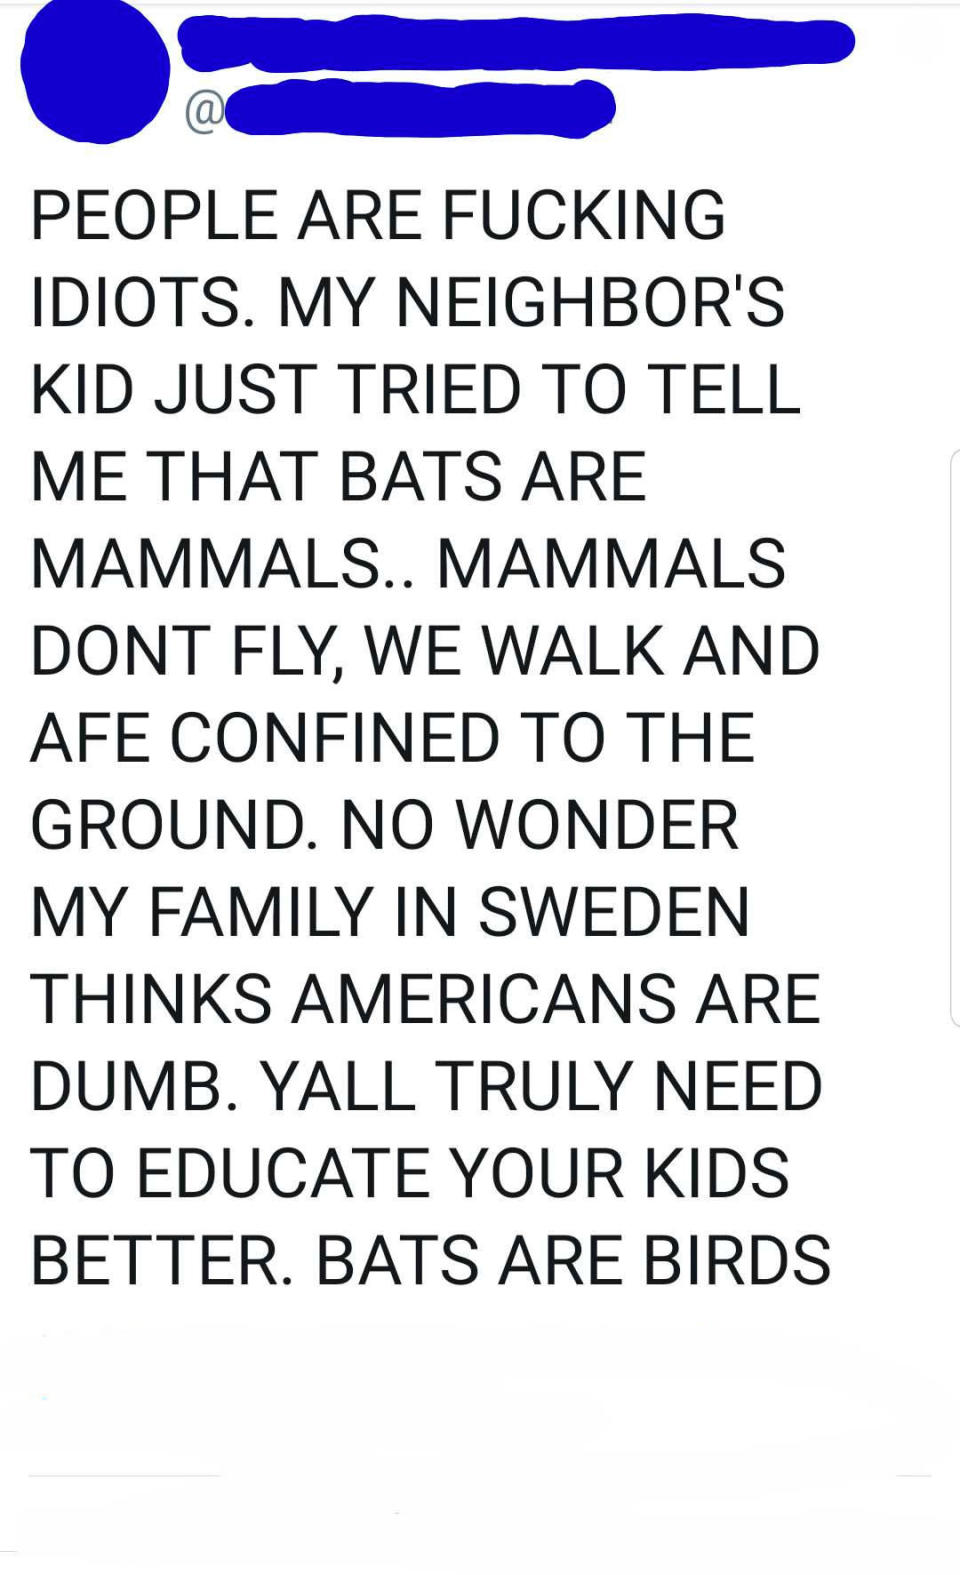 tweet of someone freaking out about how bats are birds